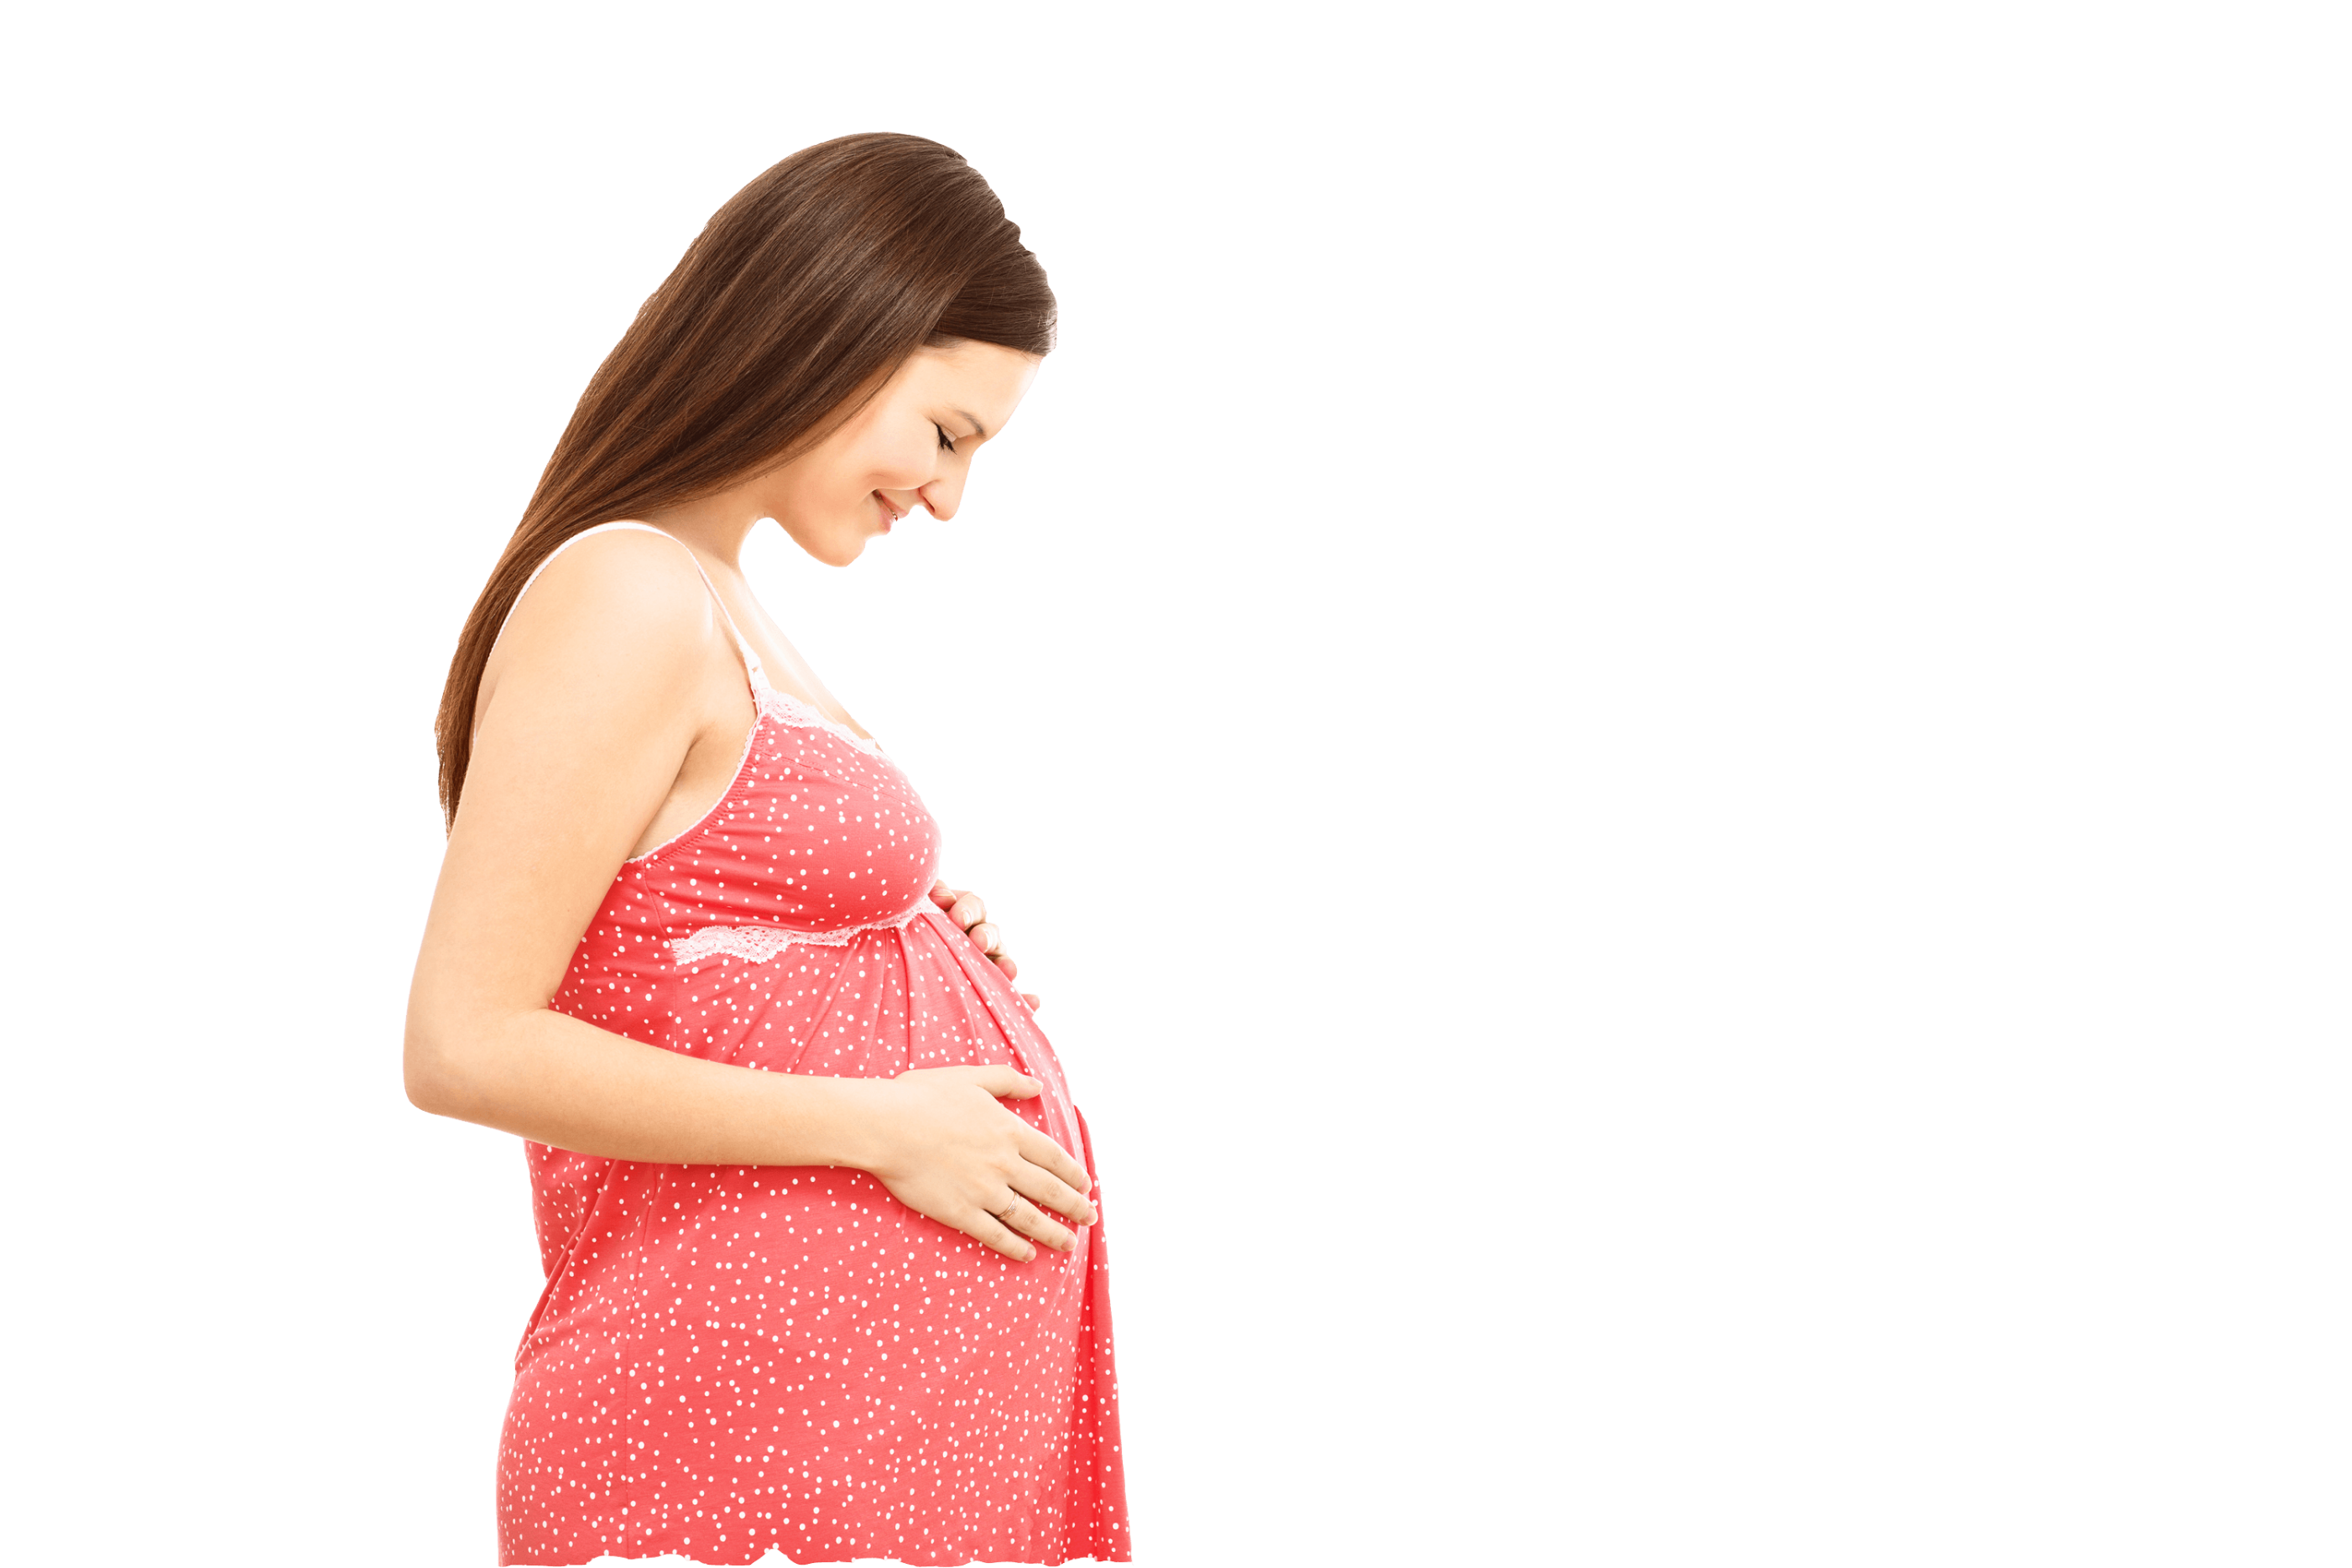 This visual is about pregnant freetoedit #pregnant.